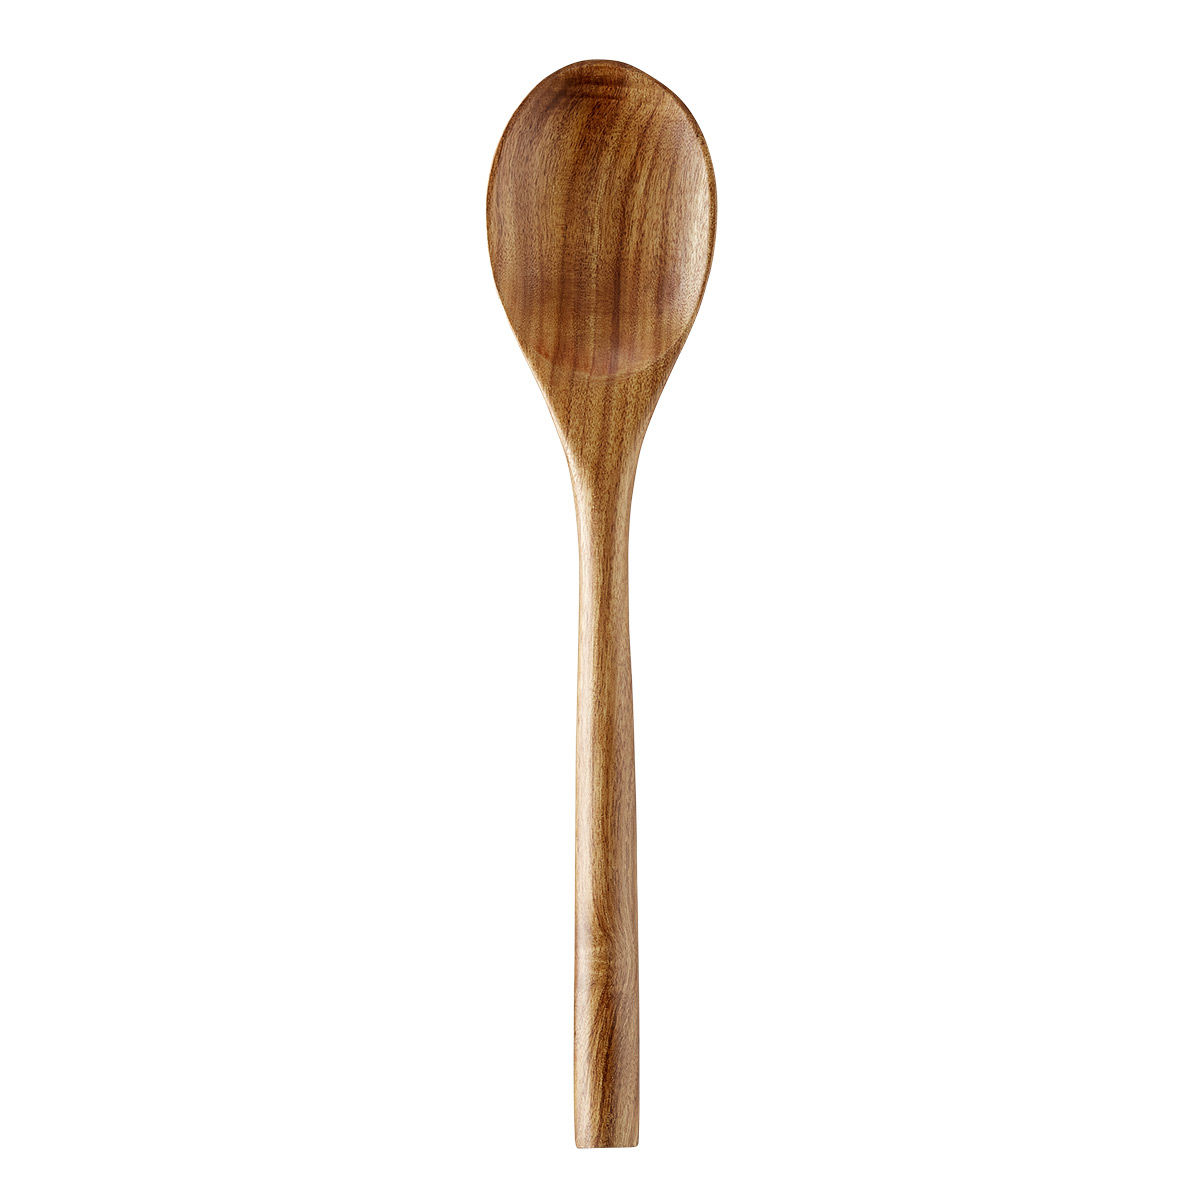 https://www.containerstore.com/catalogimages/453461/10090213_Acacia_Spoon_Silo.jpg